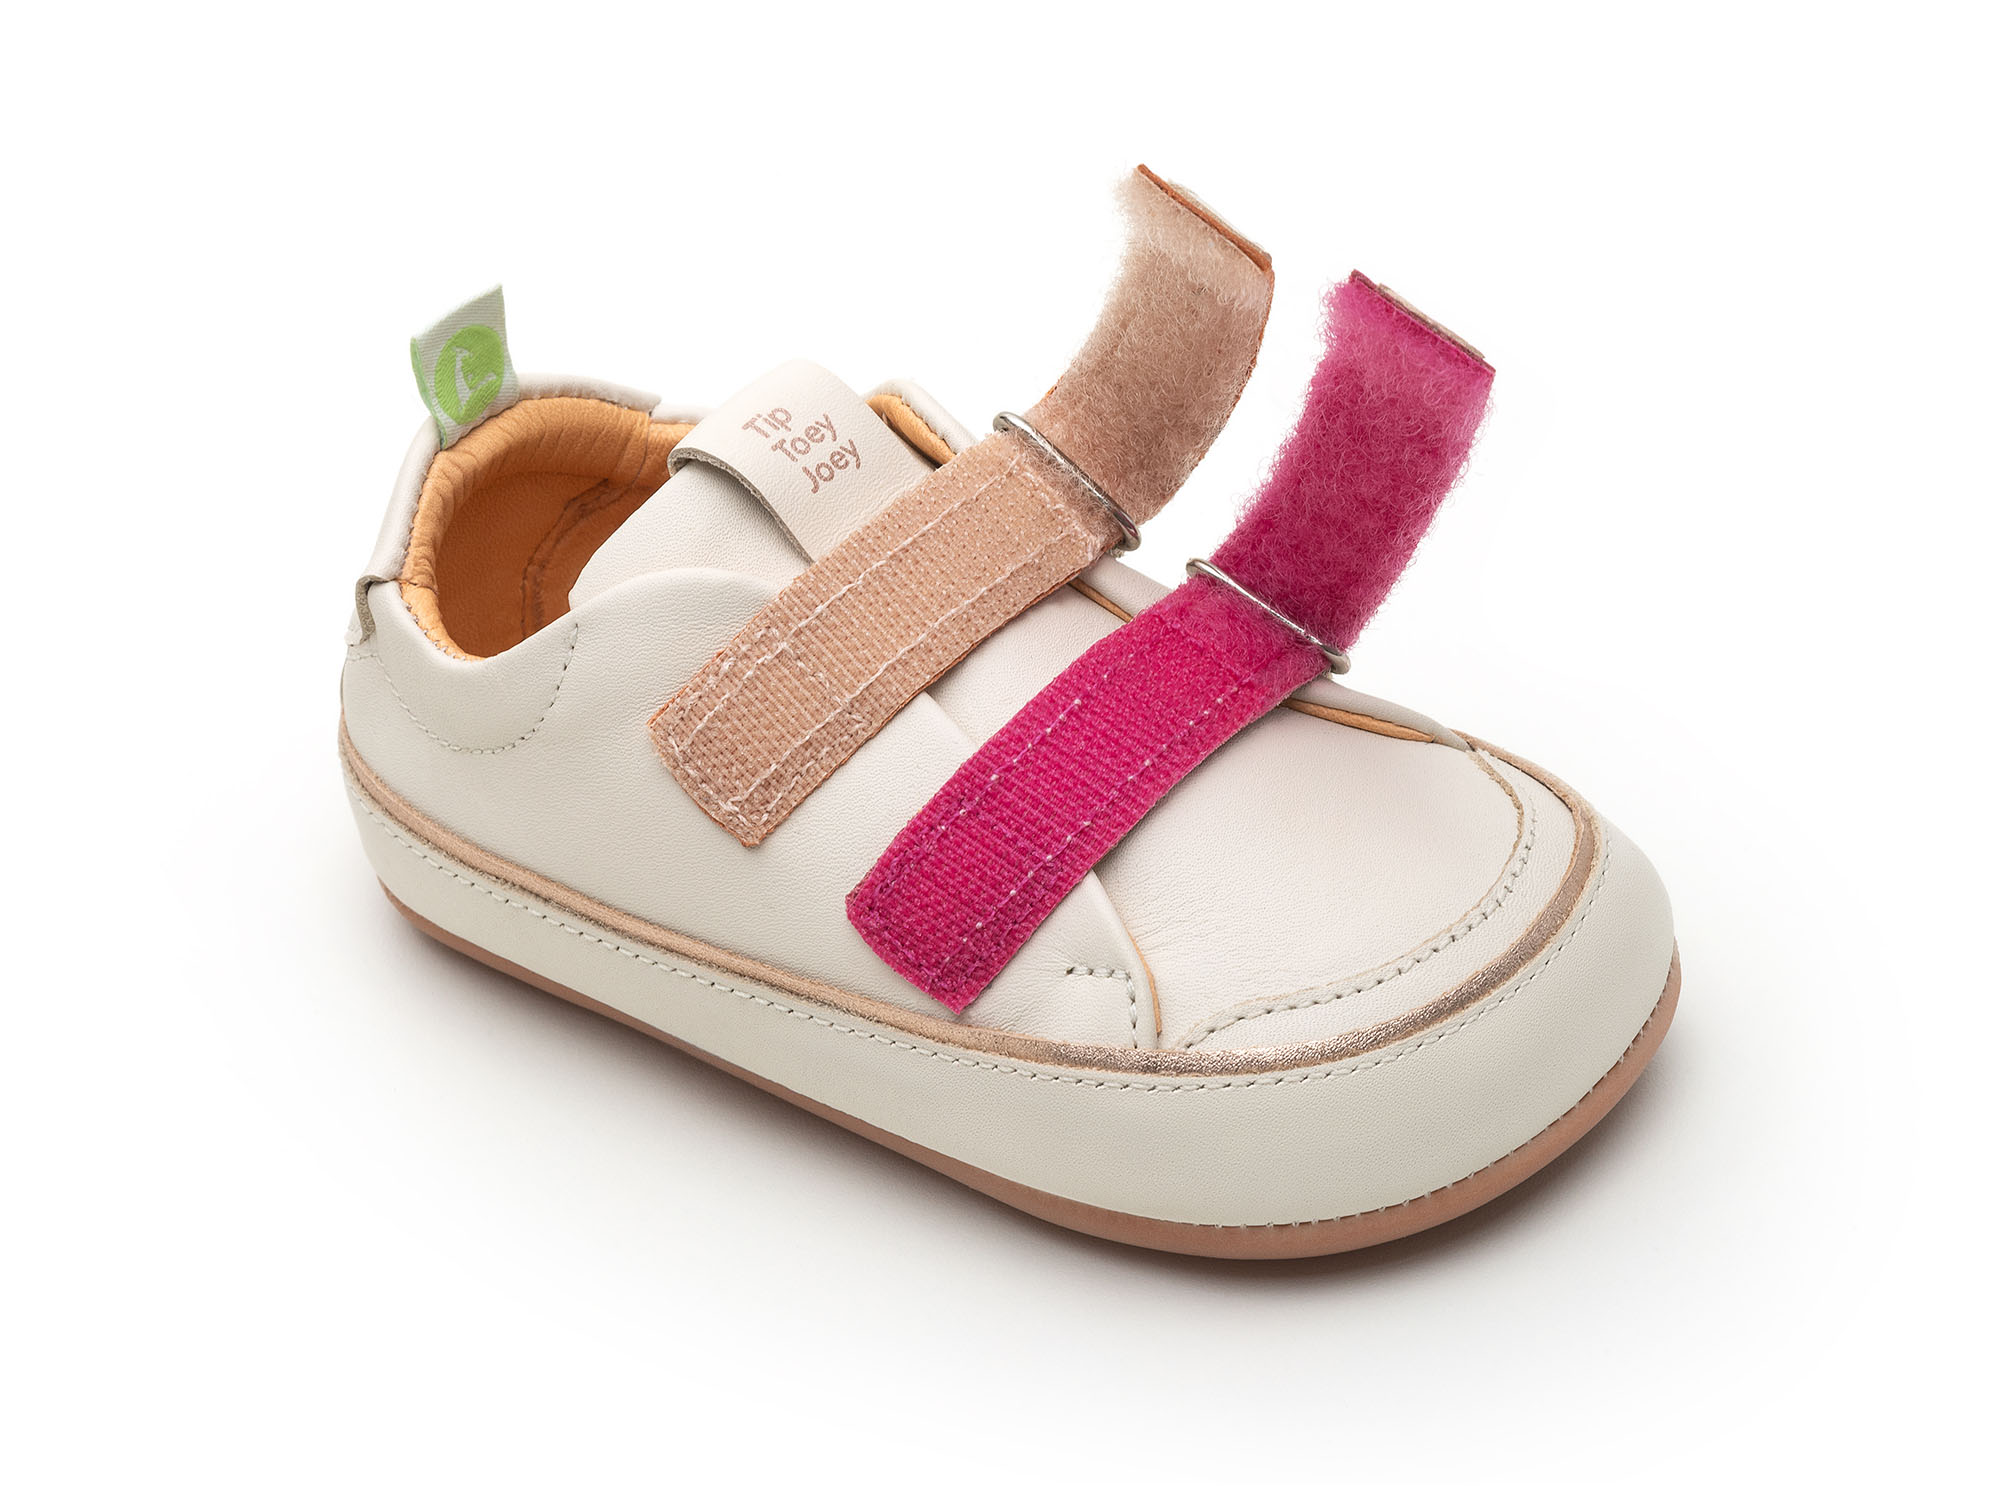 UP & GO Sneakers for Girls Bossy Colors | Tip Toey Joey - Australia - 5